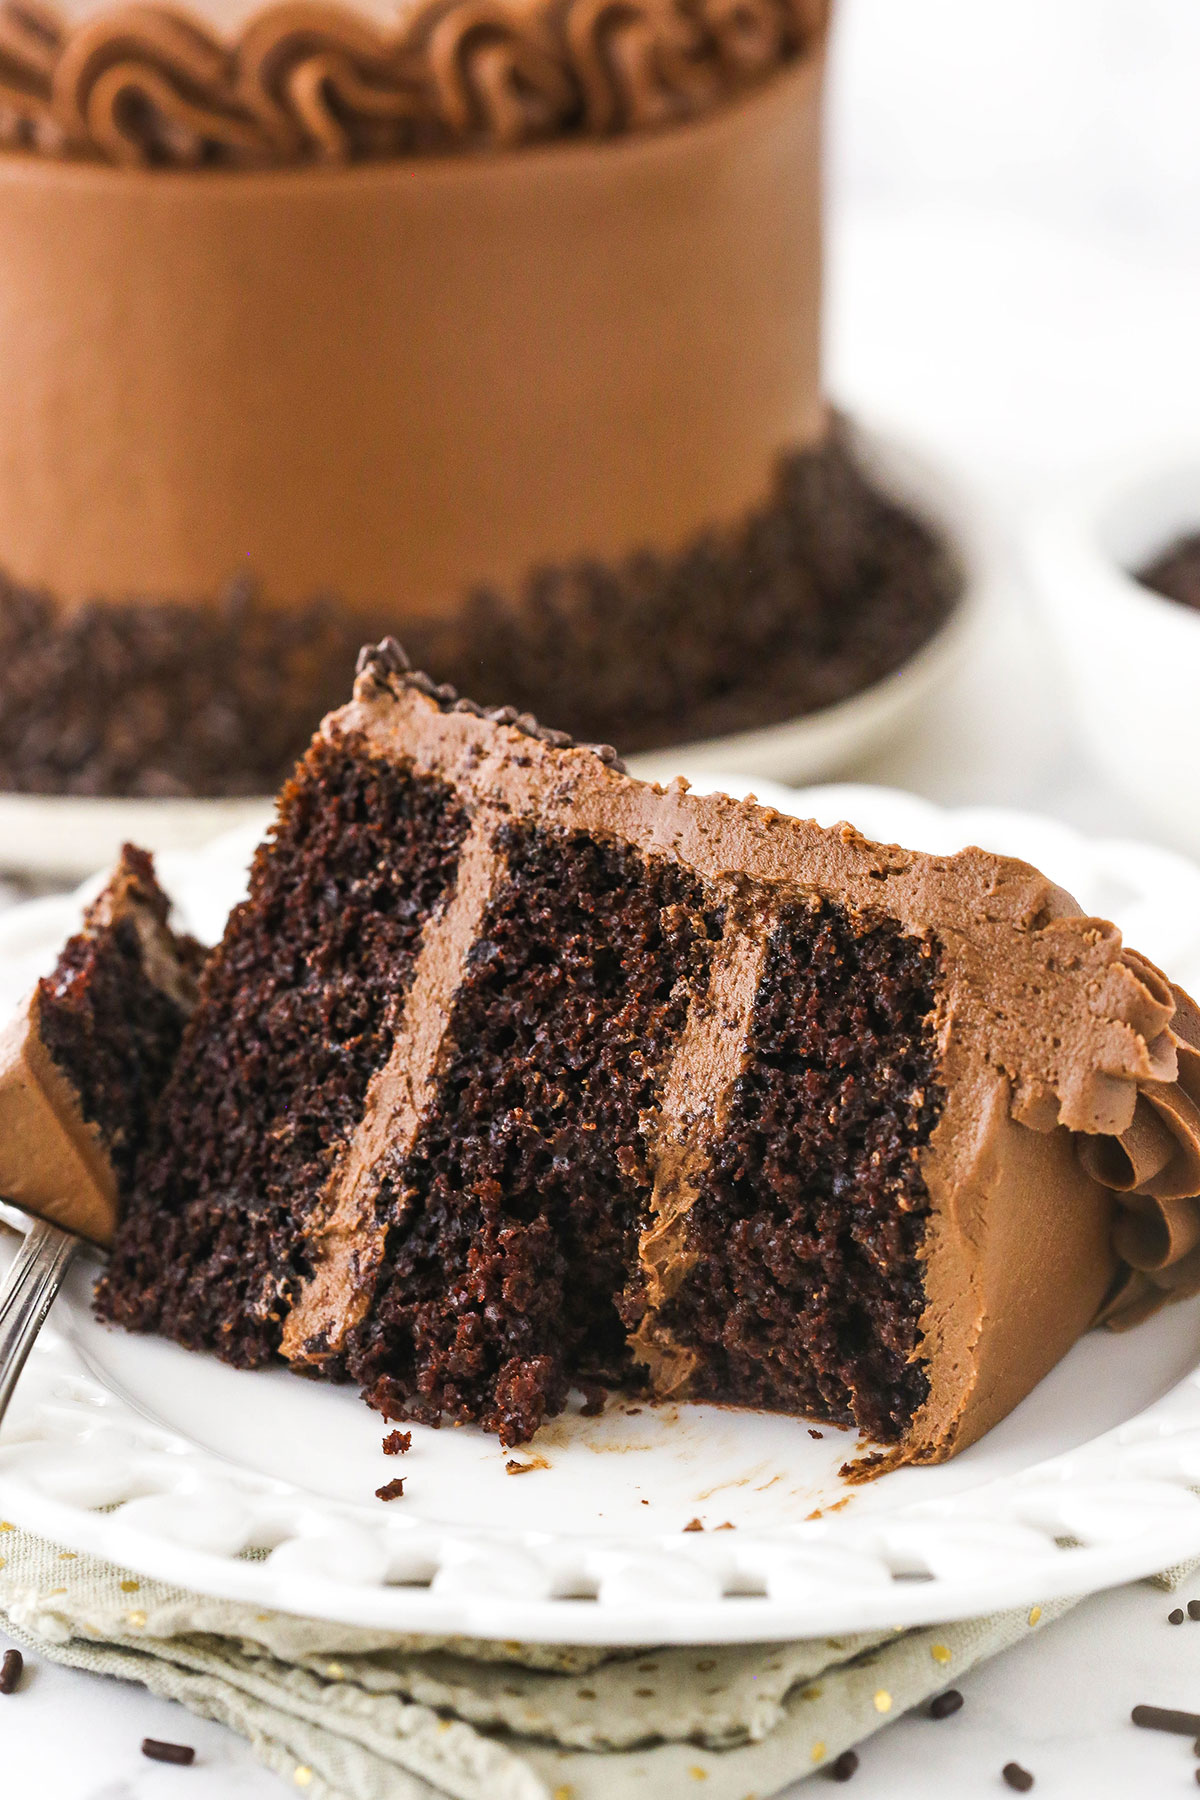 A slice of chocolate layer cake on a plate with a bite on a fork